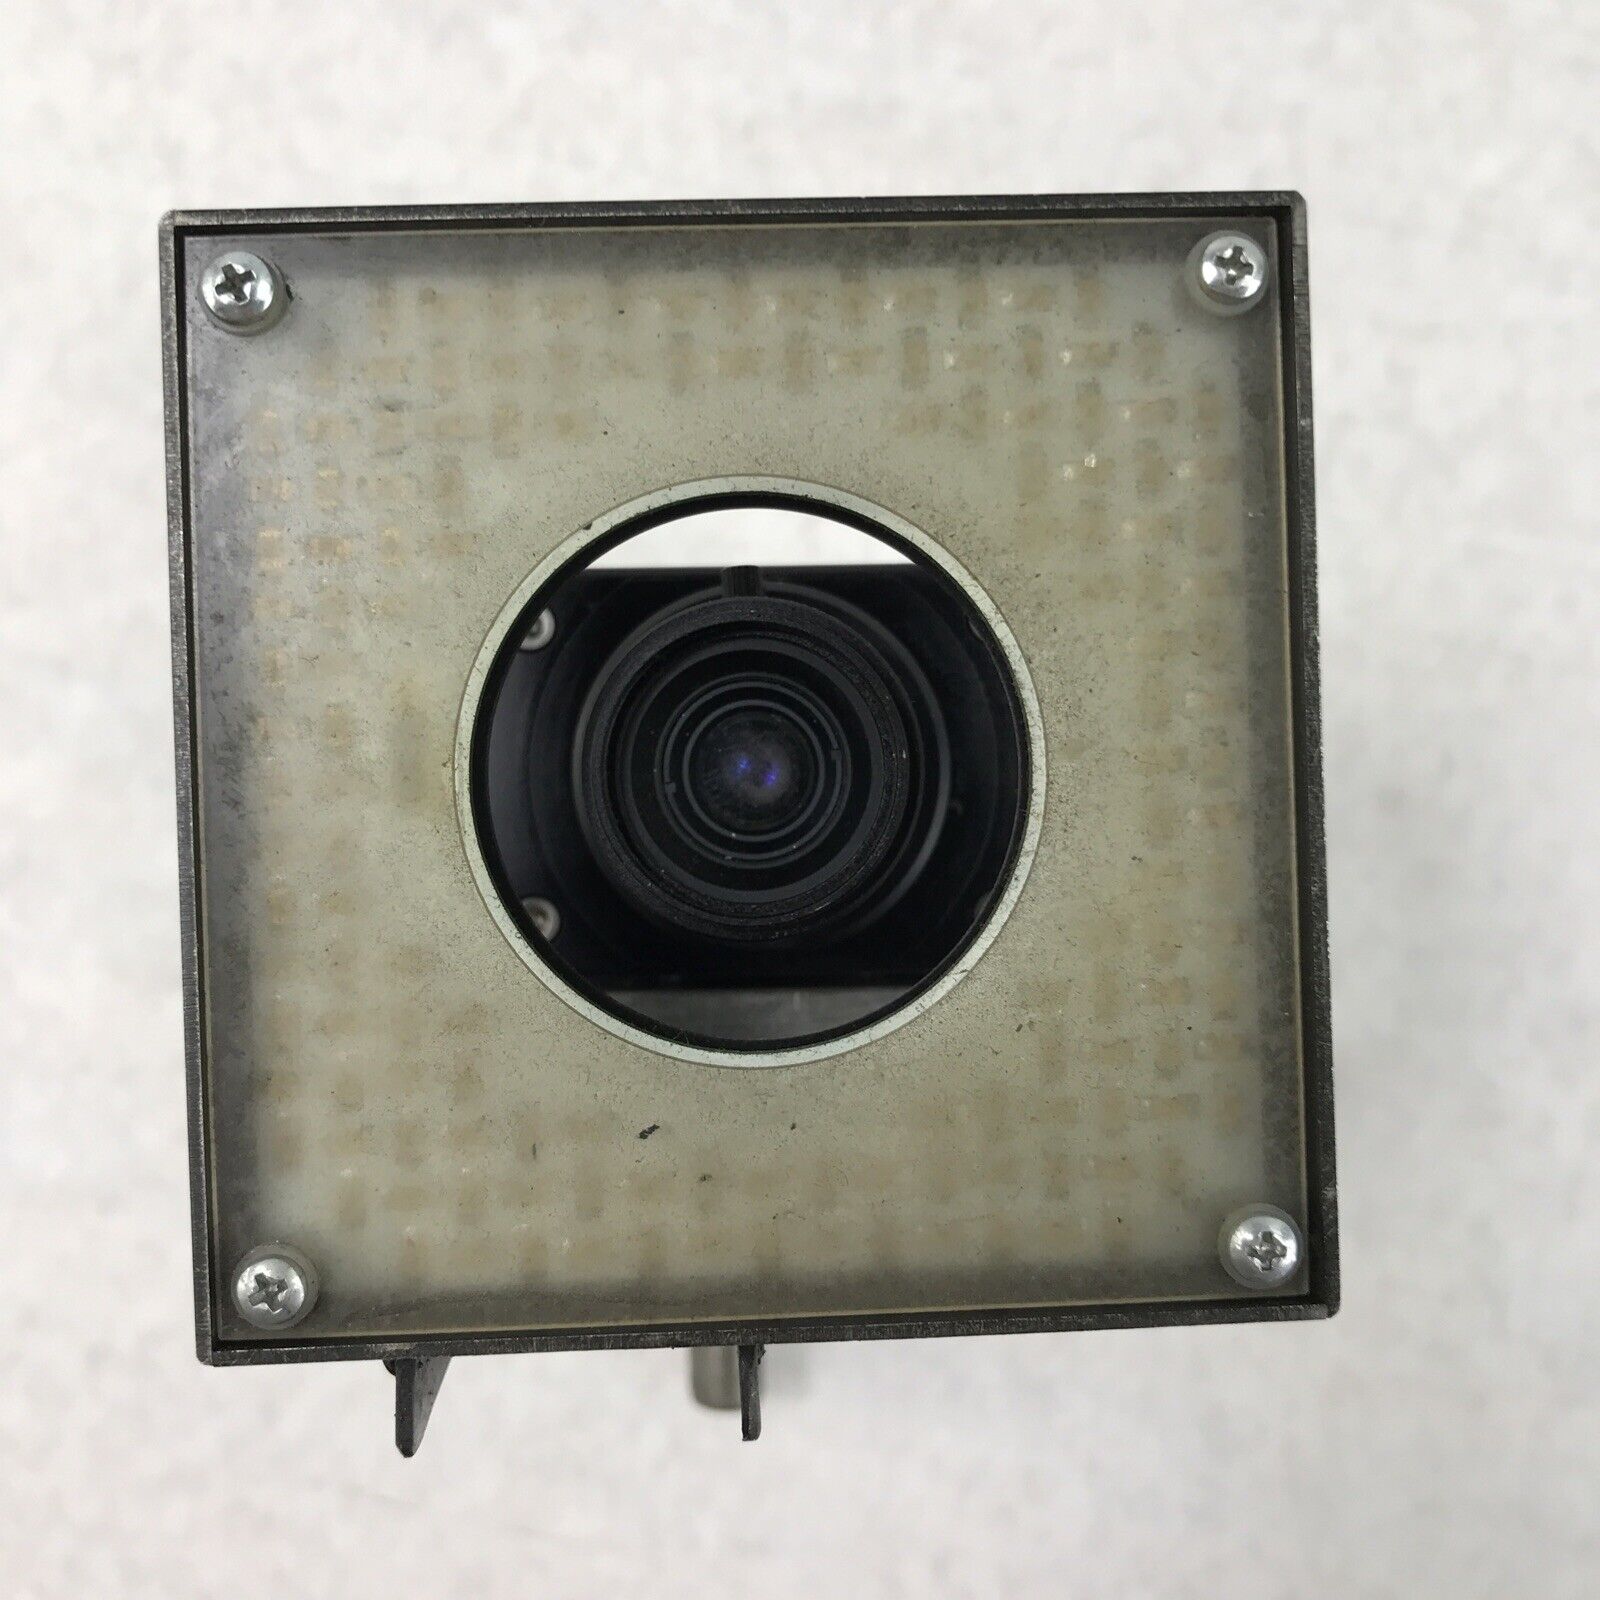 Vintage PPT Vision Impact T20 Security Camera